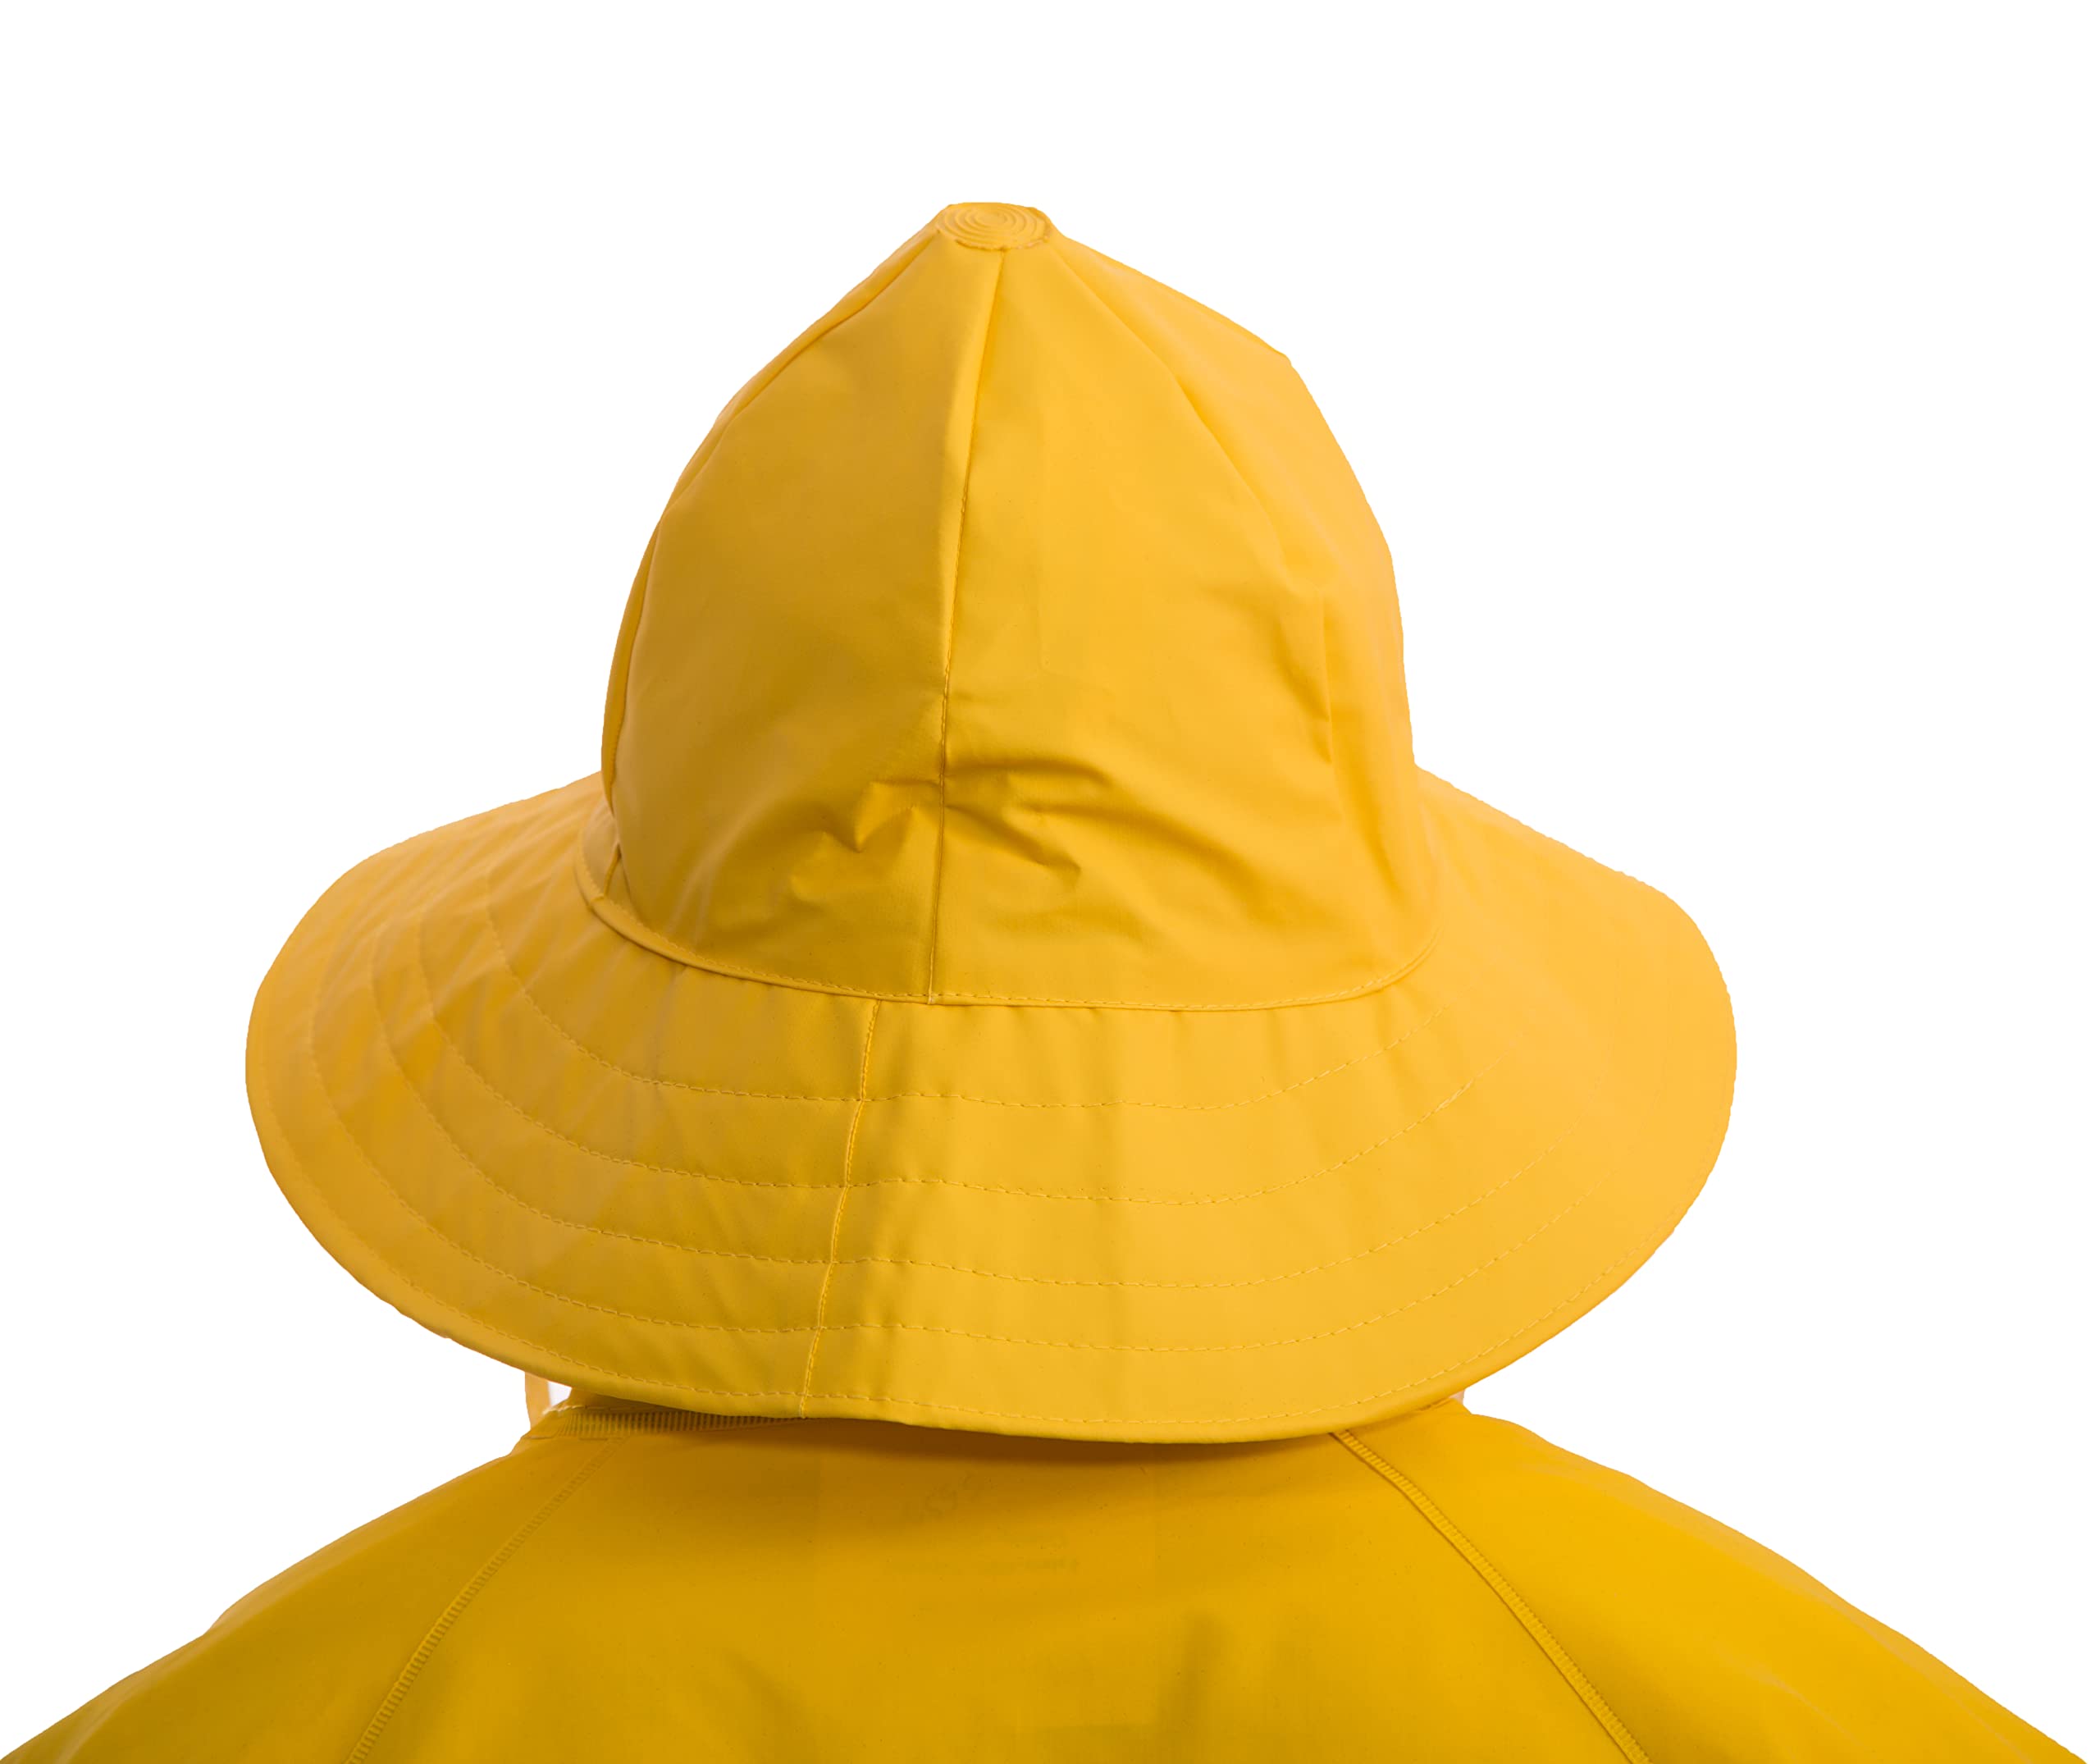 Tingley H53237 Industrial Work Hat, LG, Yellow